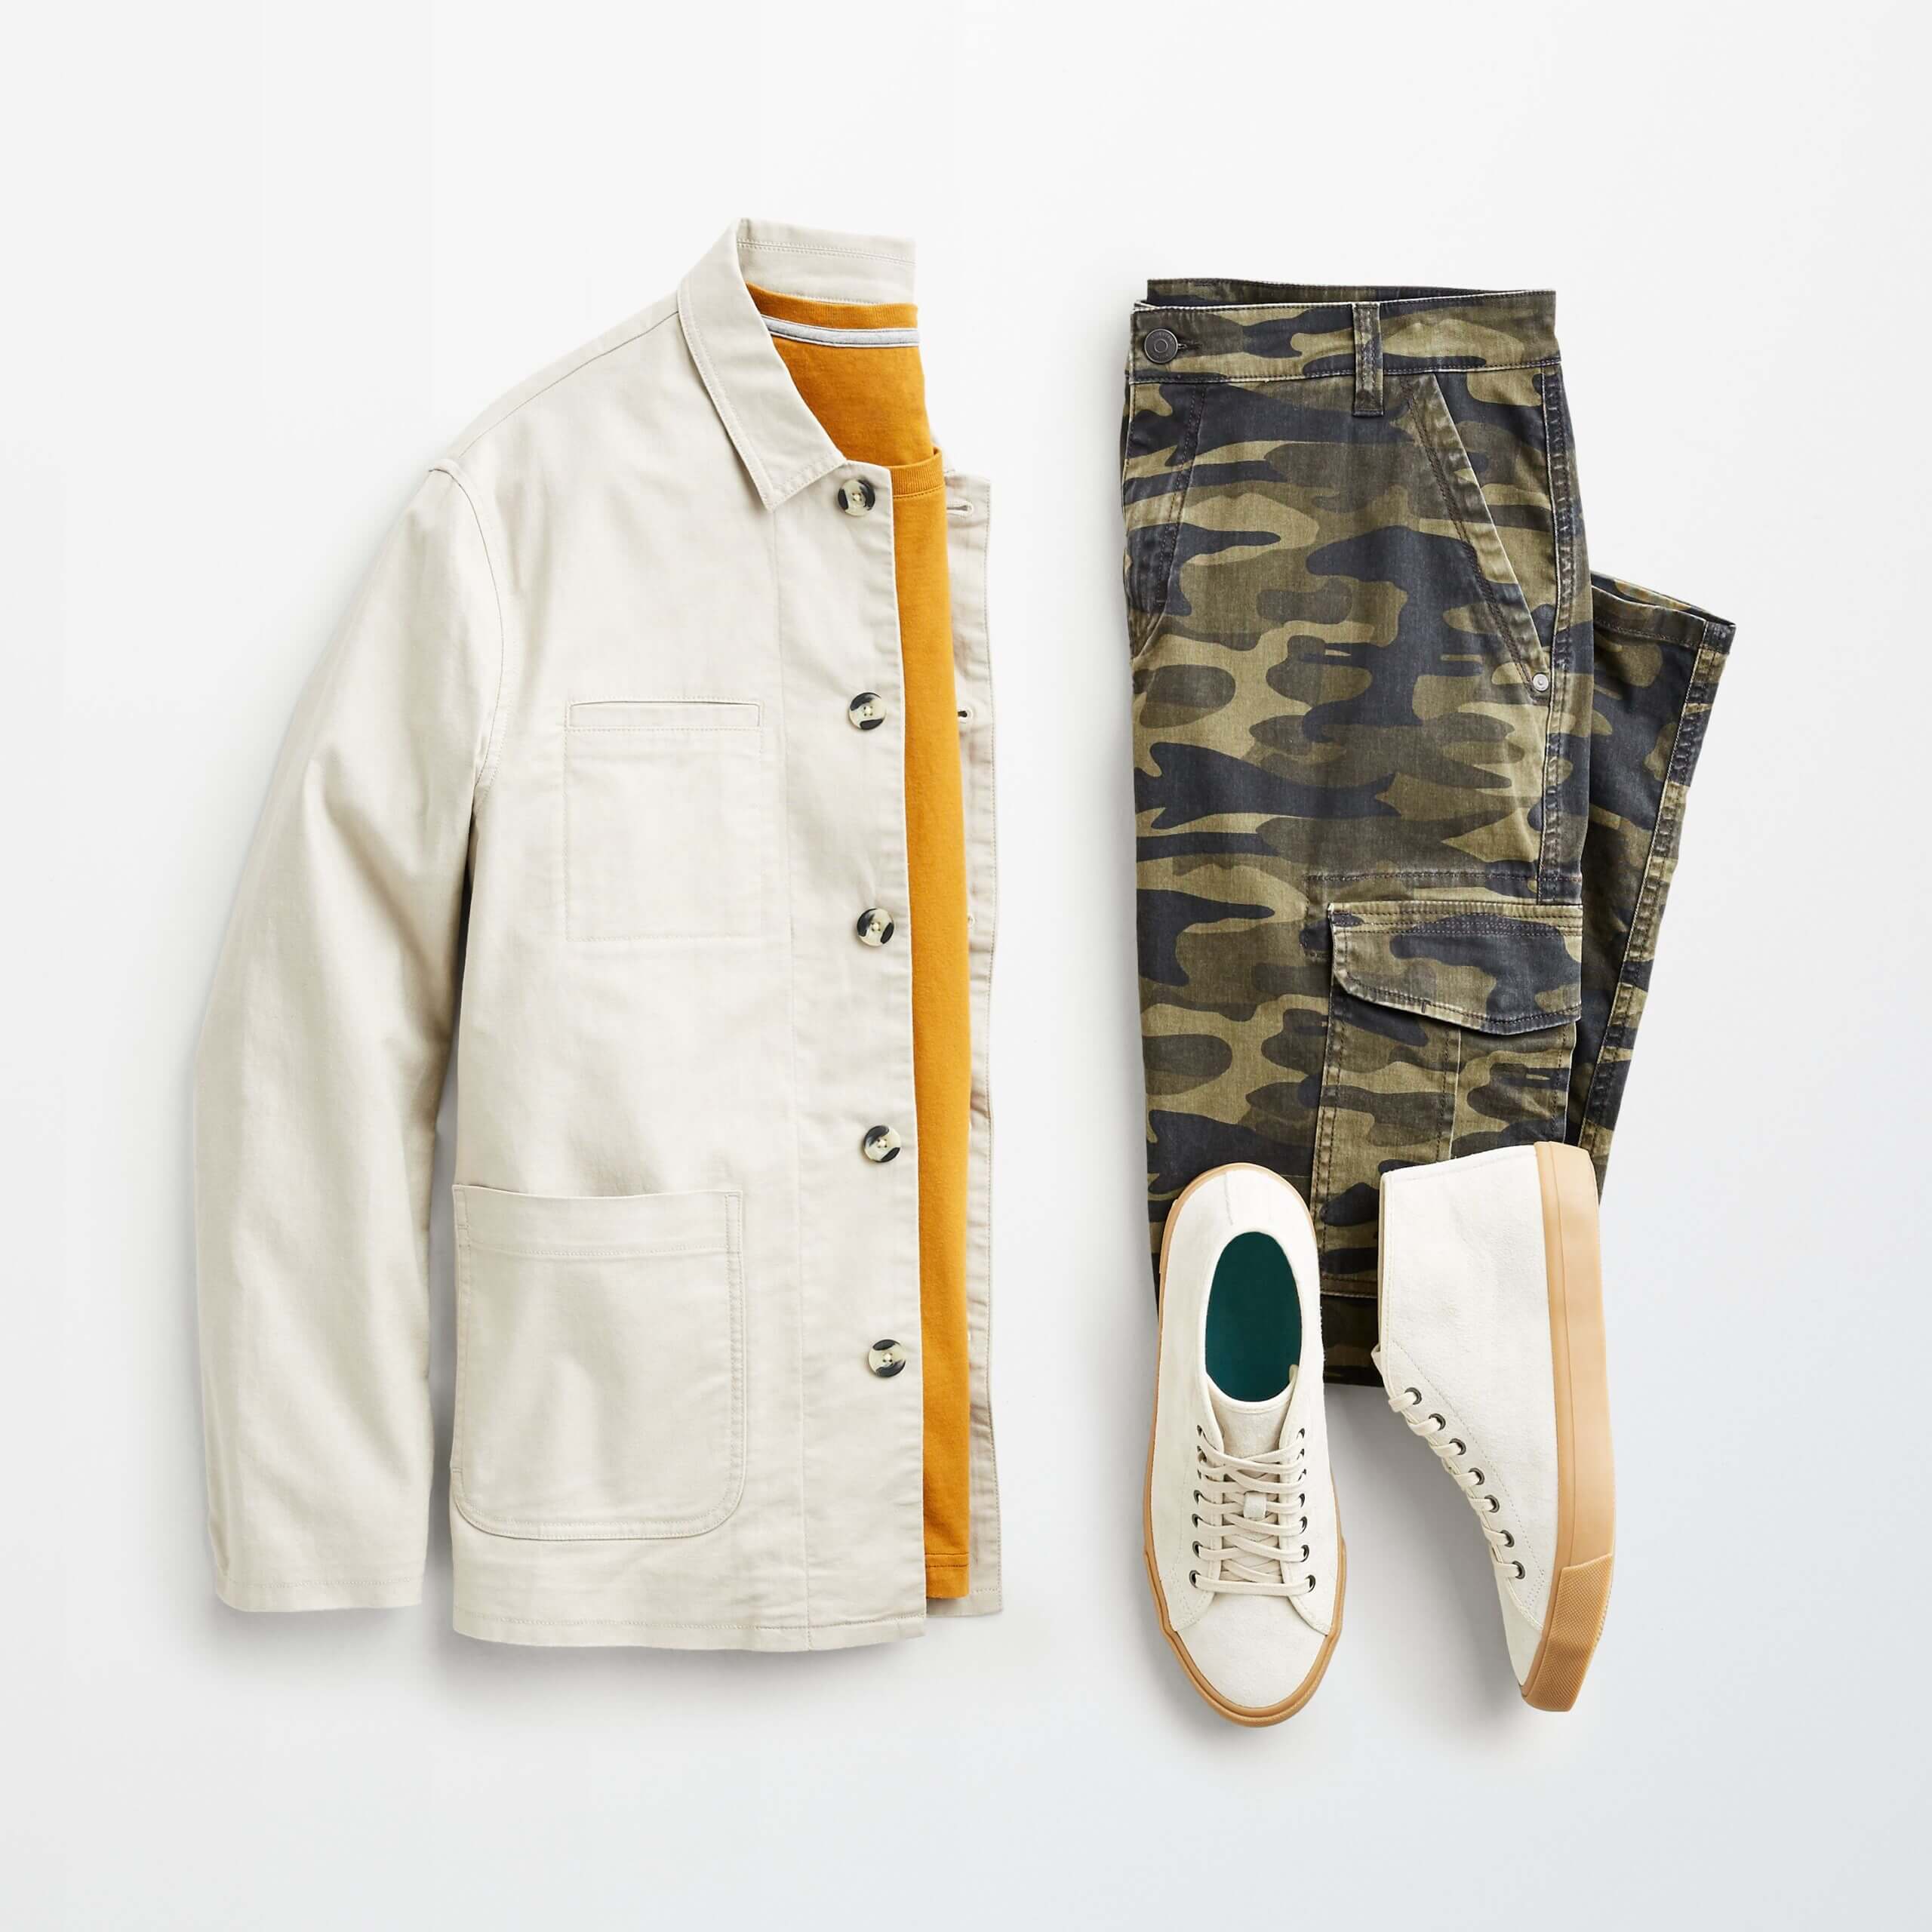 Stitch Fix men's outfit laydown featuring chore coat over mustard tee next to cargo pants and suede sneakers.